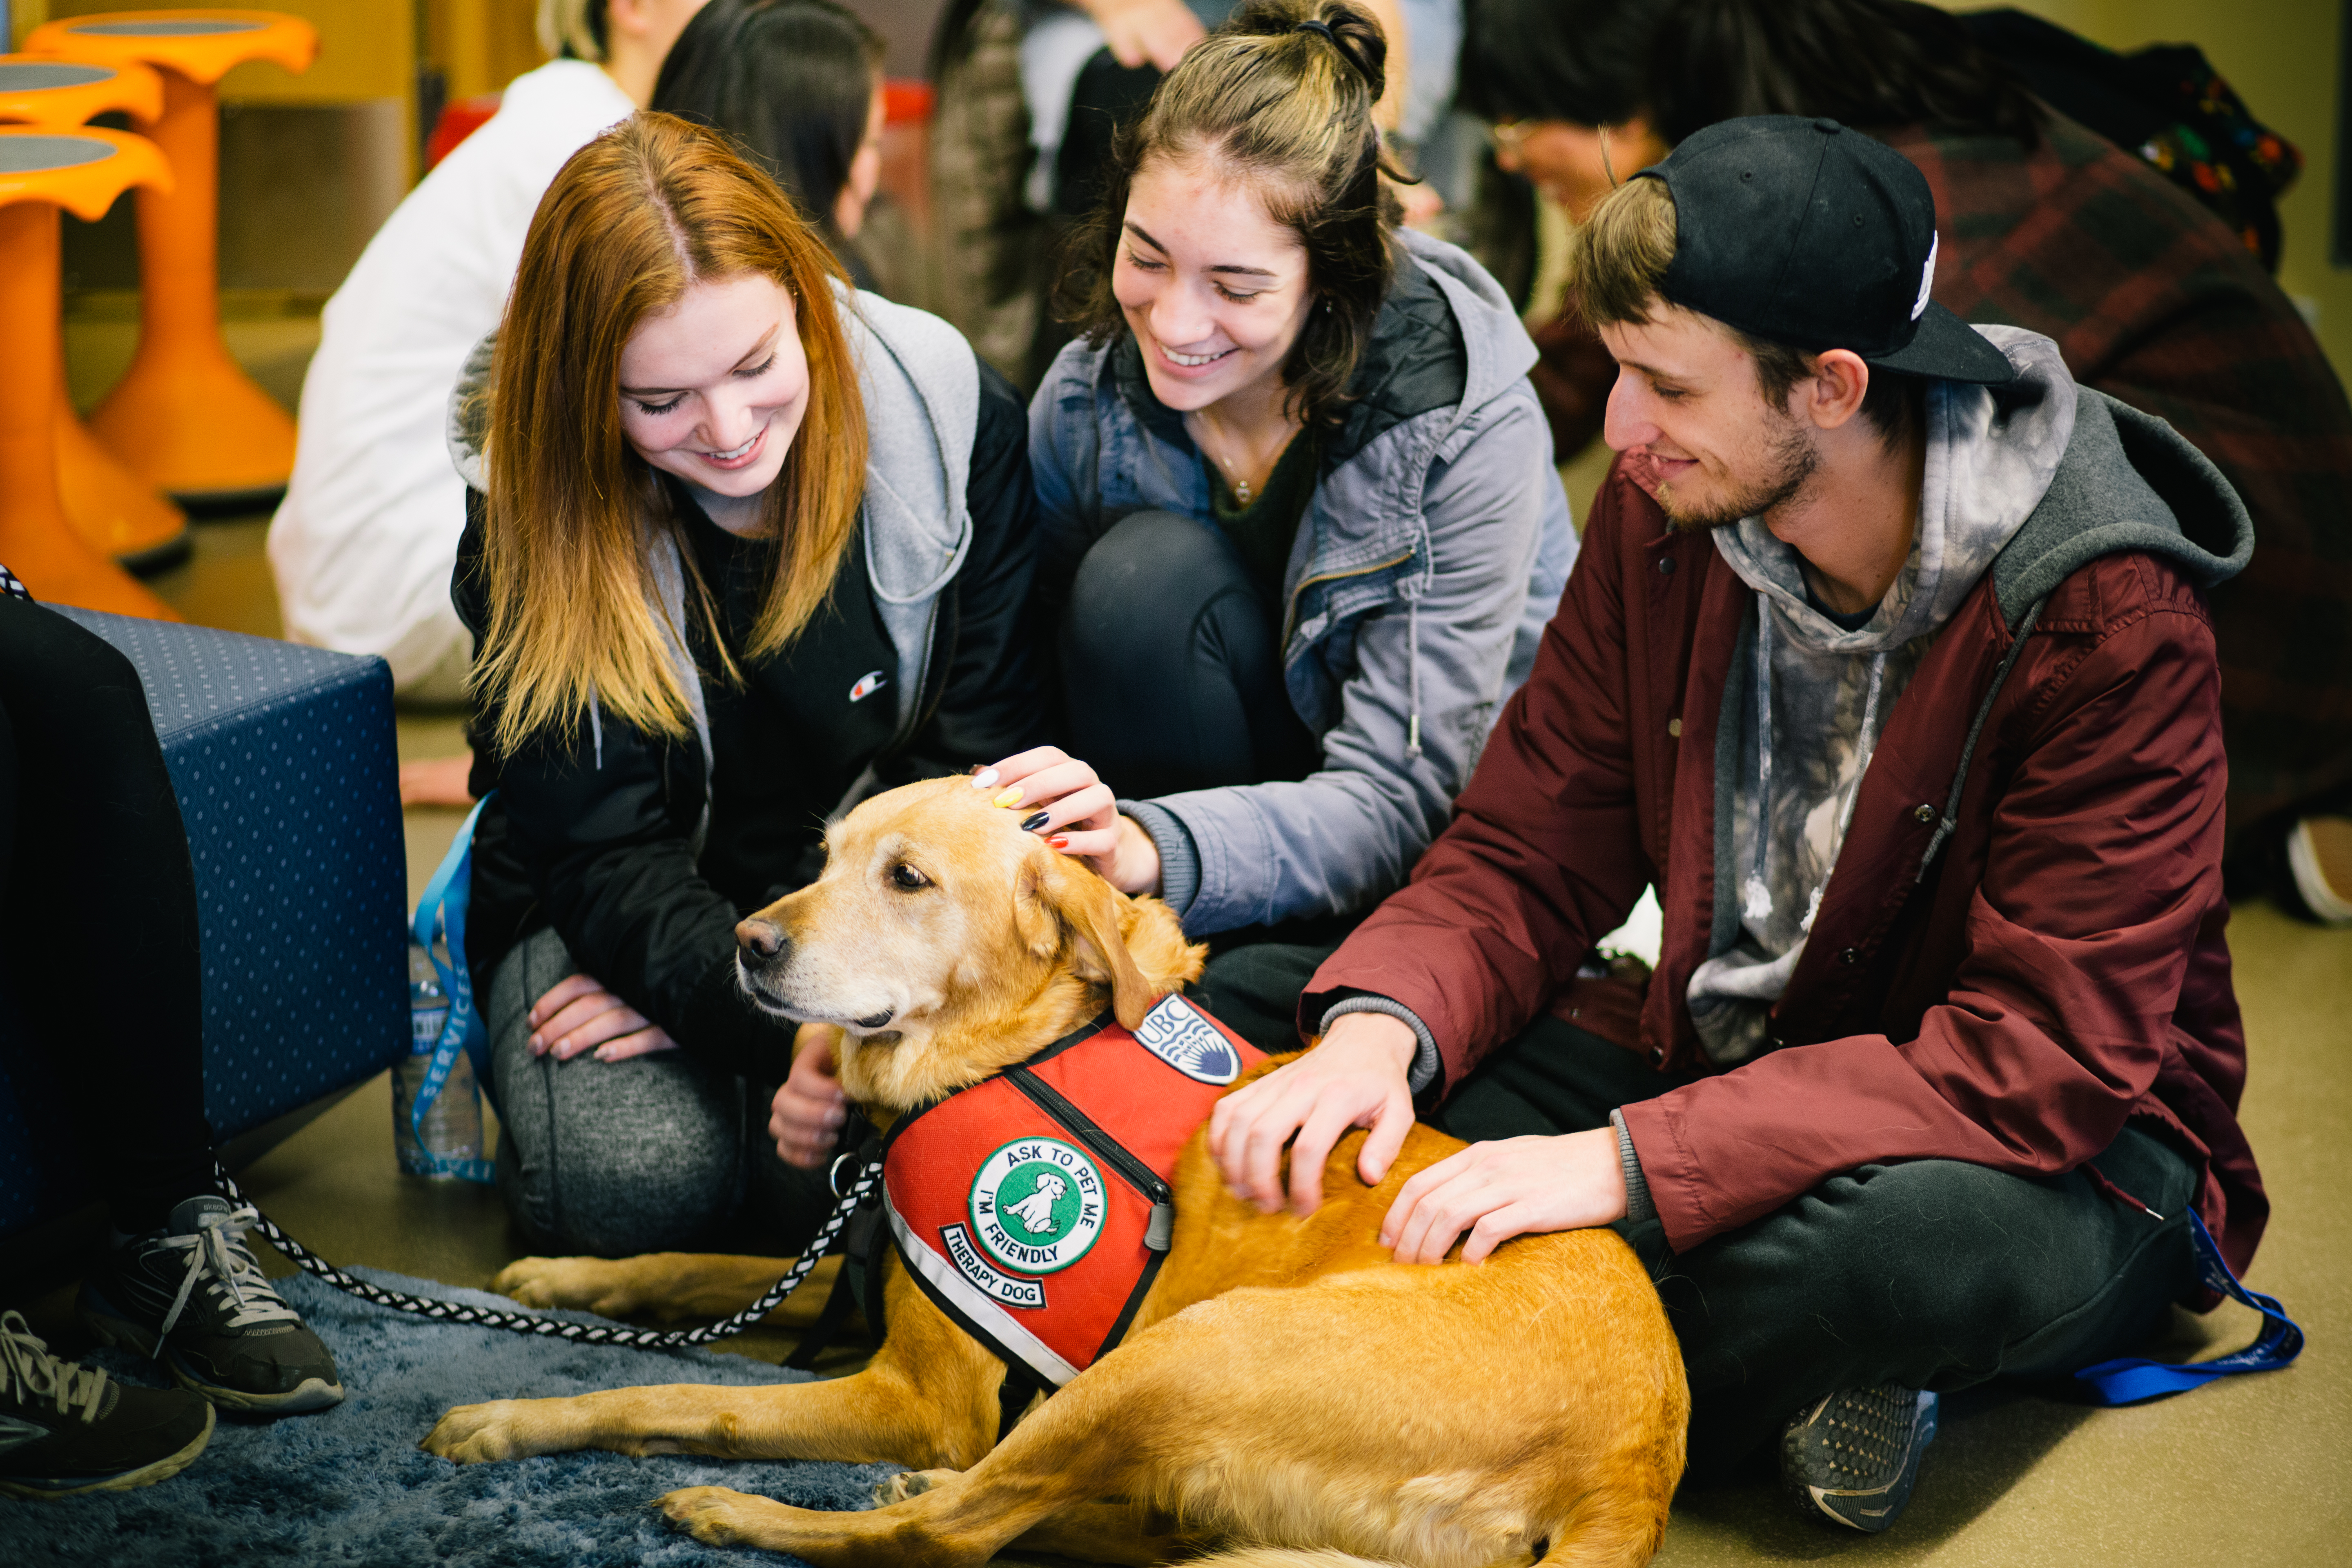  Students sit with a trained therapy dog.